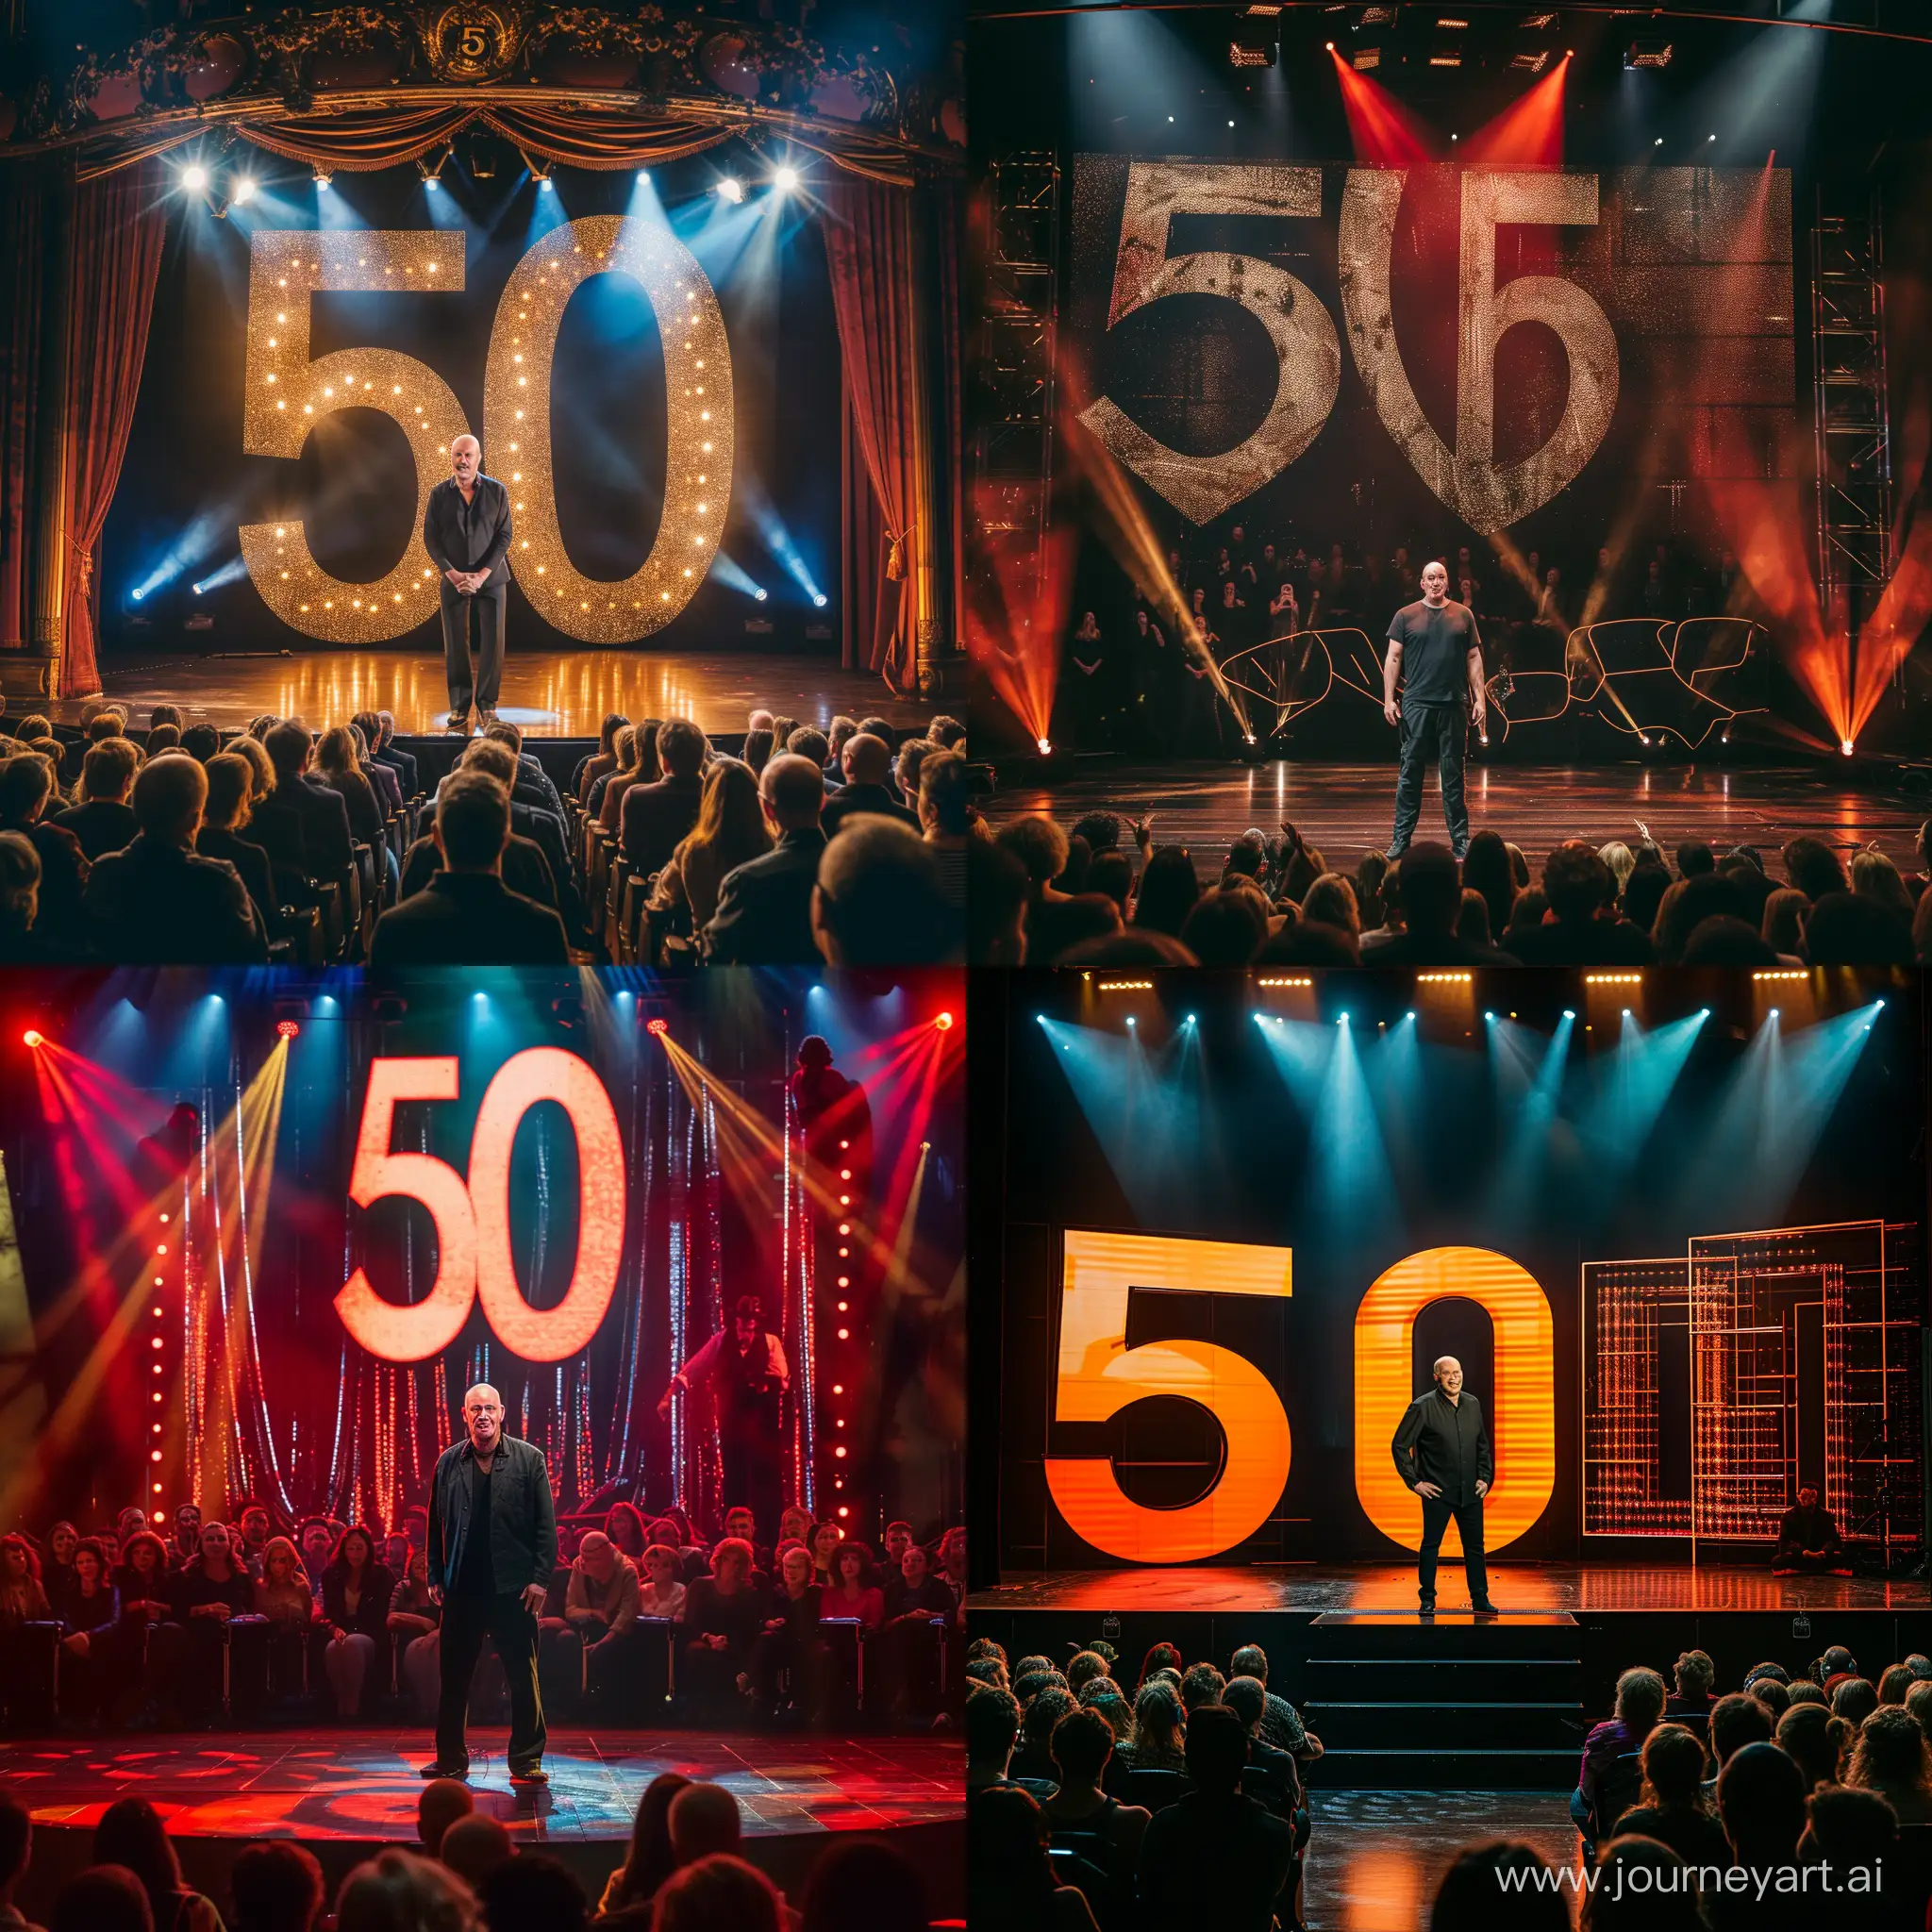 epic and celebrative, a bald man stand out on a theater stage, a huge scenography with the number "50", enthusiastic audience